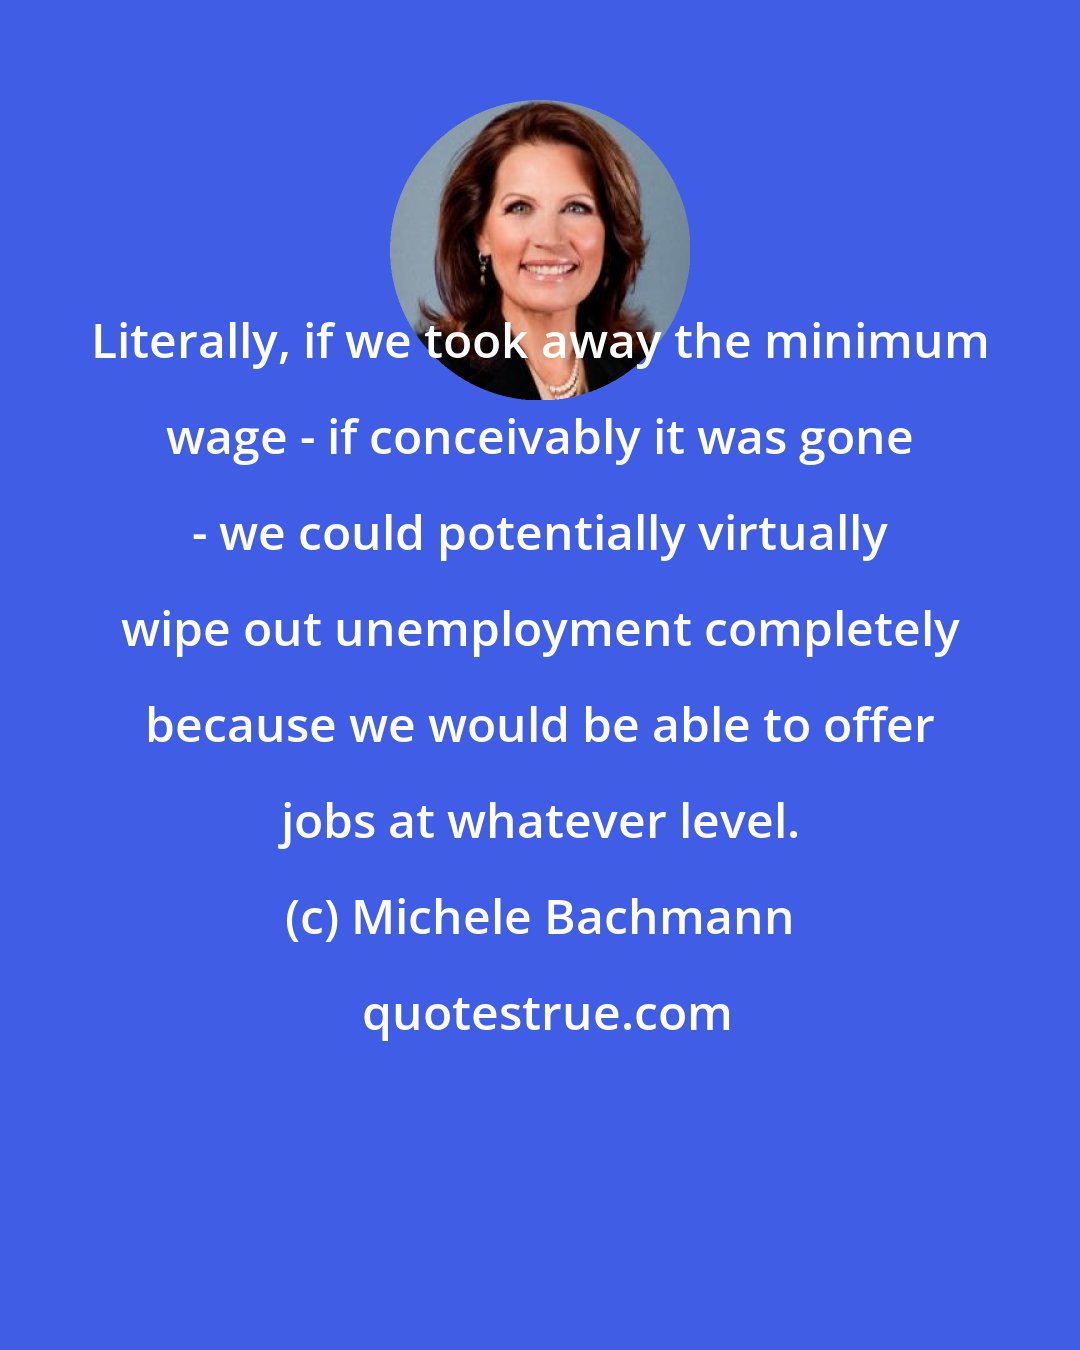 Michele Bachmann: Literally, if we took away the minimum wage - if conceivably it was gone - we could potentially virtually wipe out unemployment completely because we would be able to offer jobs at whatever level.